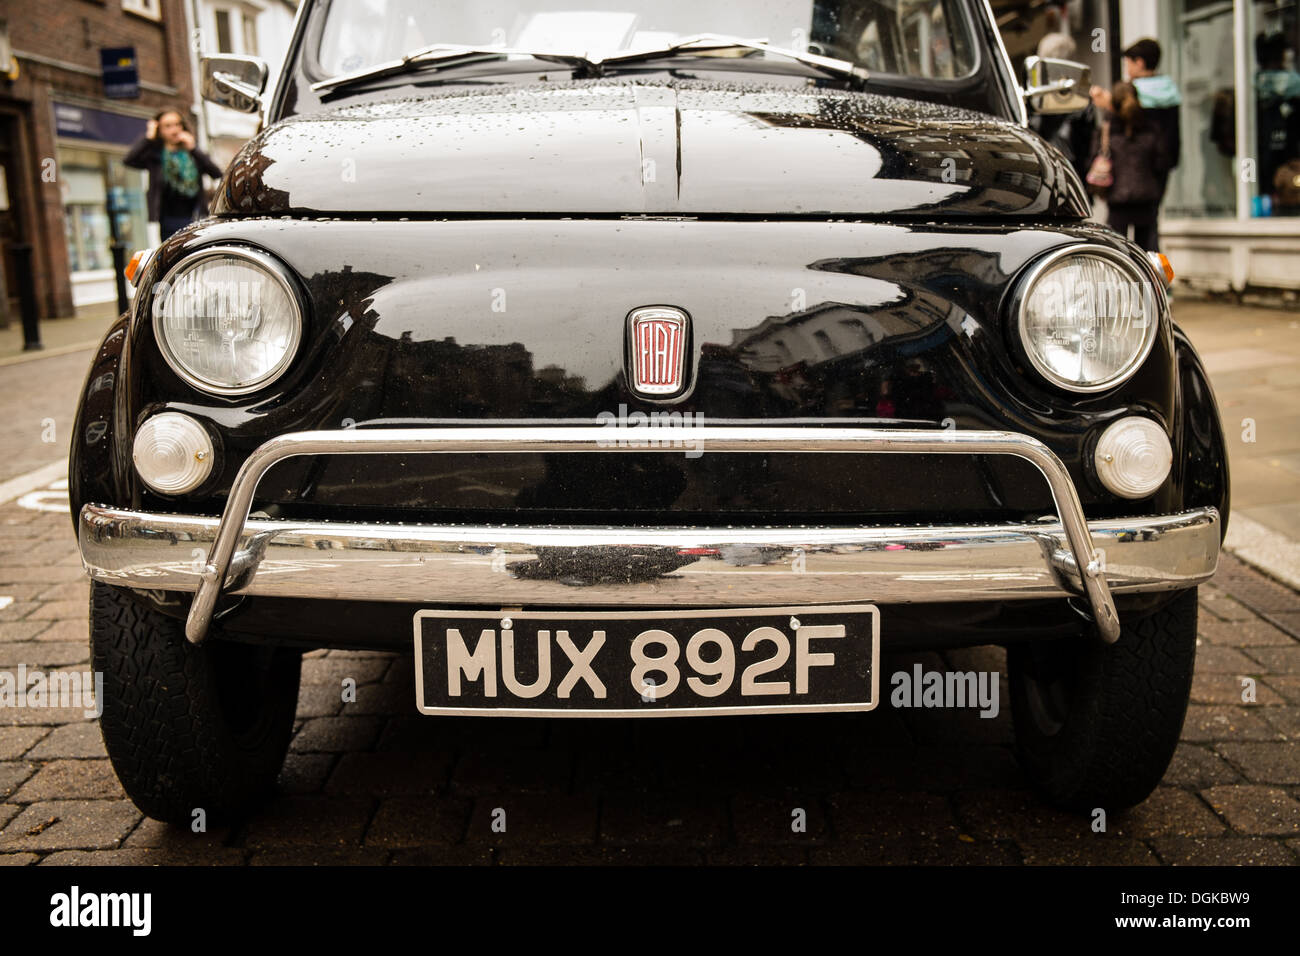 This image shows the front view of a classic Fiat 500 car. Stock Photo